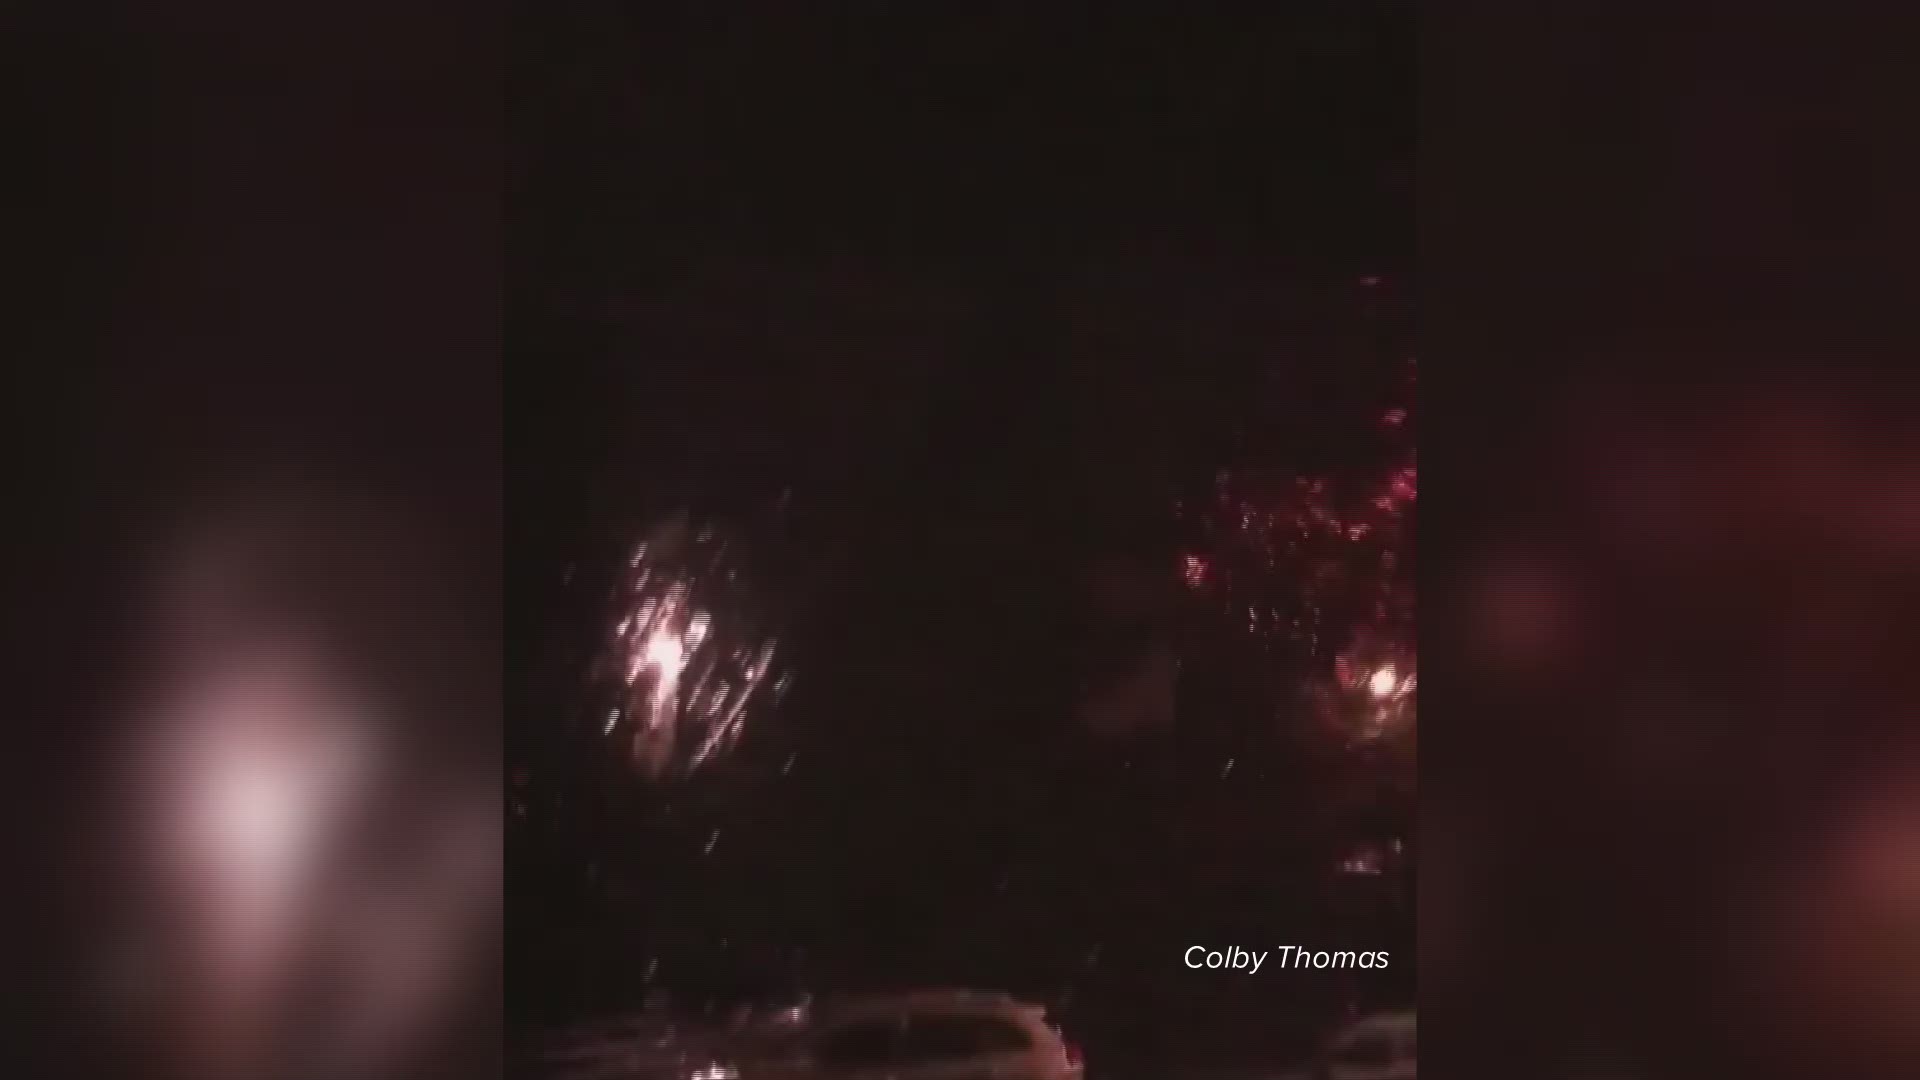 It seemed like fireworks in Biddeford as transformers blew around 5:30 a.m. this Thursday.